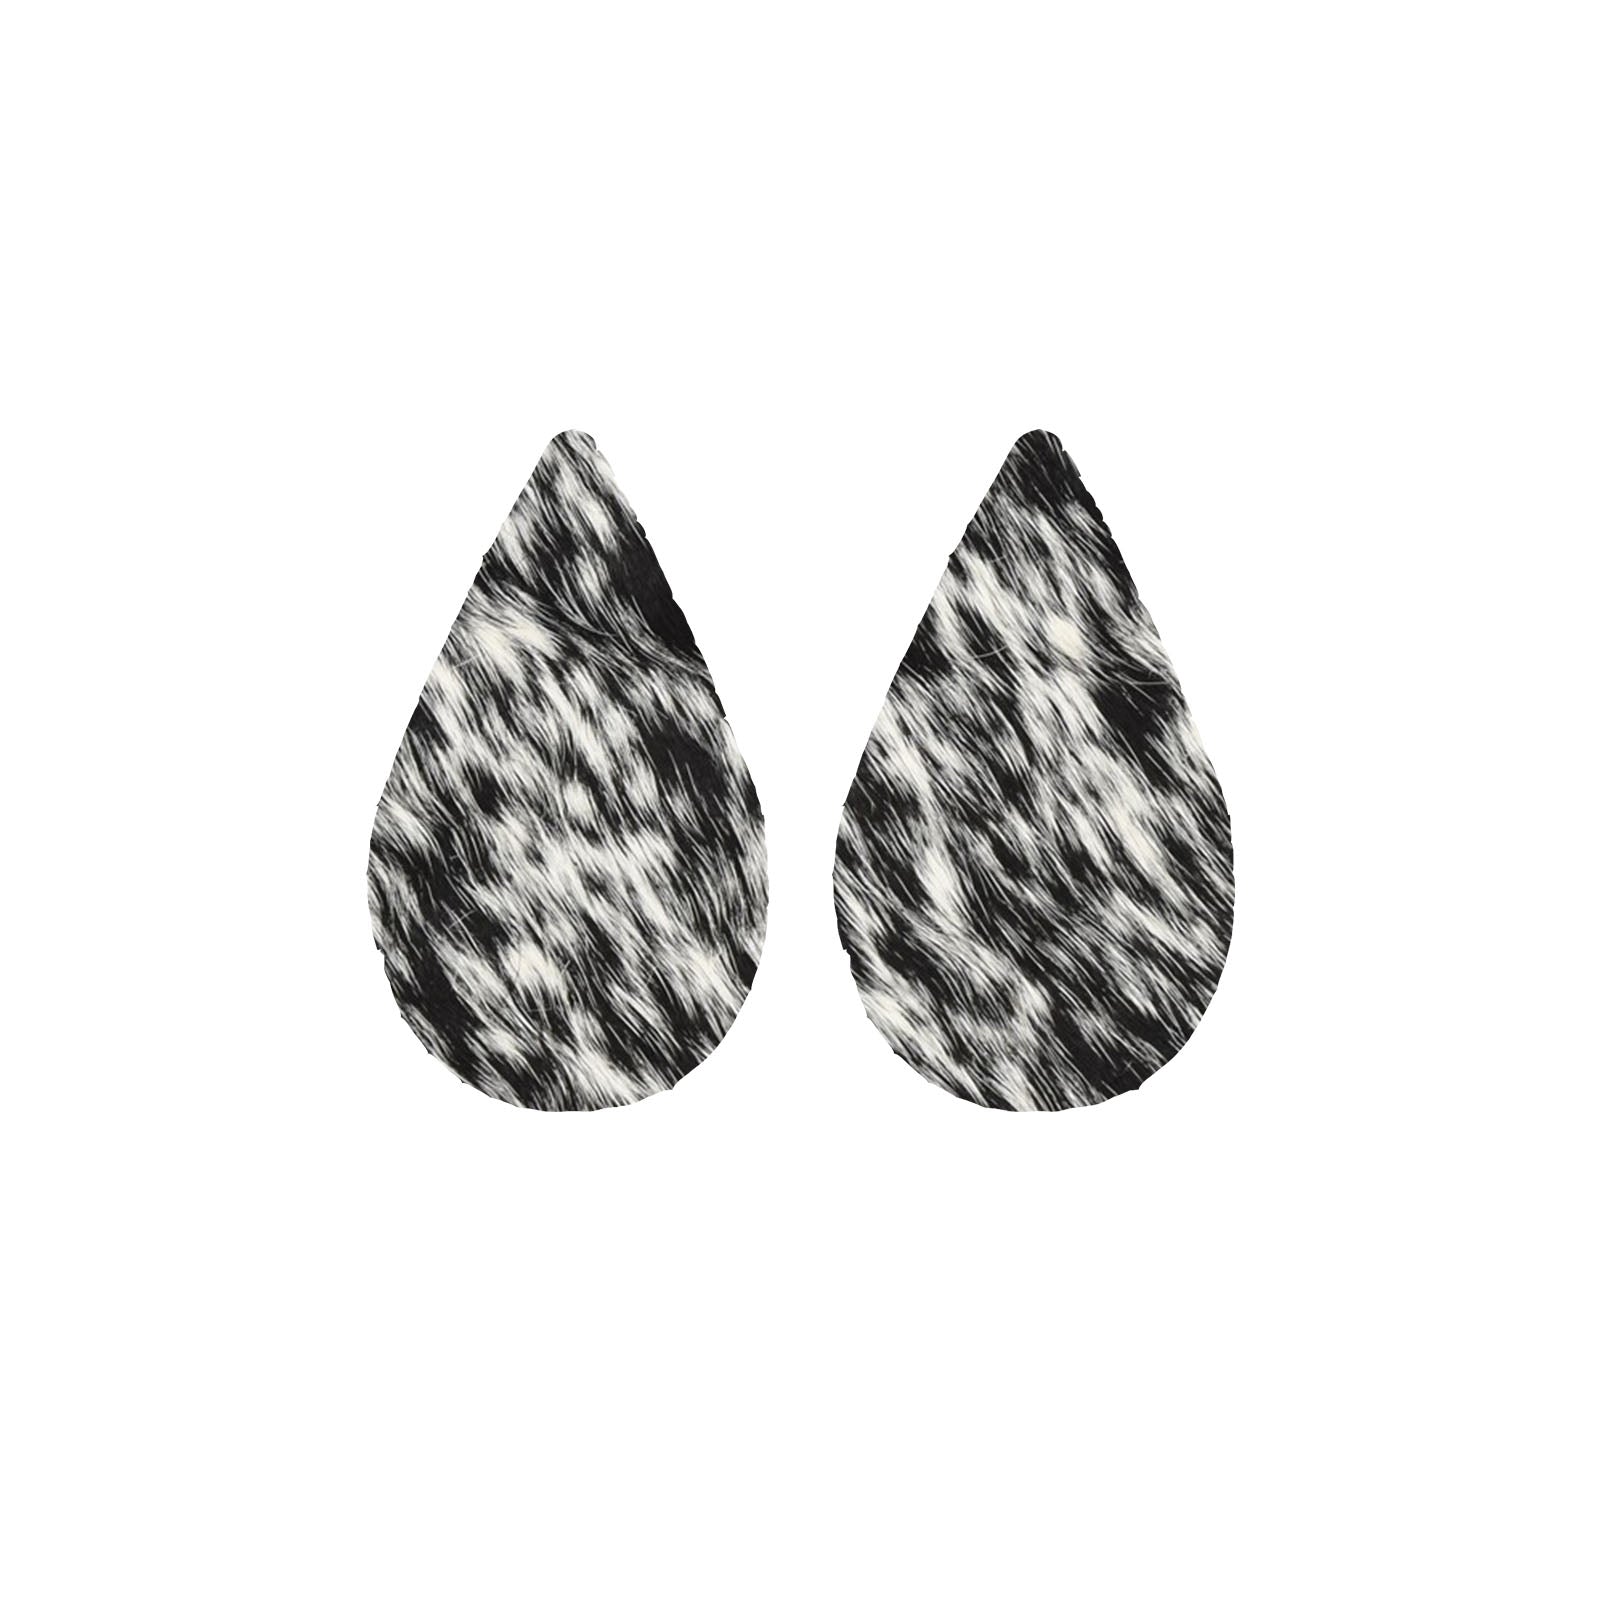 Heavy Spotted Black and Off White Hair On Die Cut Earrings, Large Teardrop | The Leather Guy